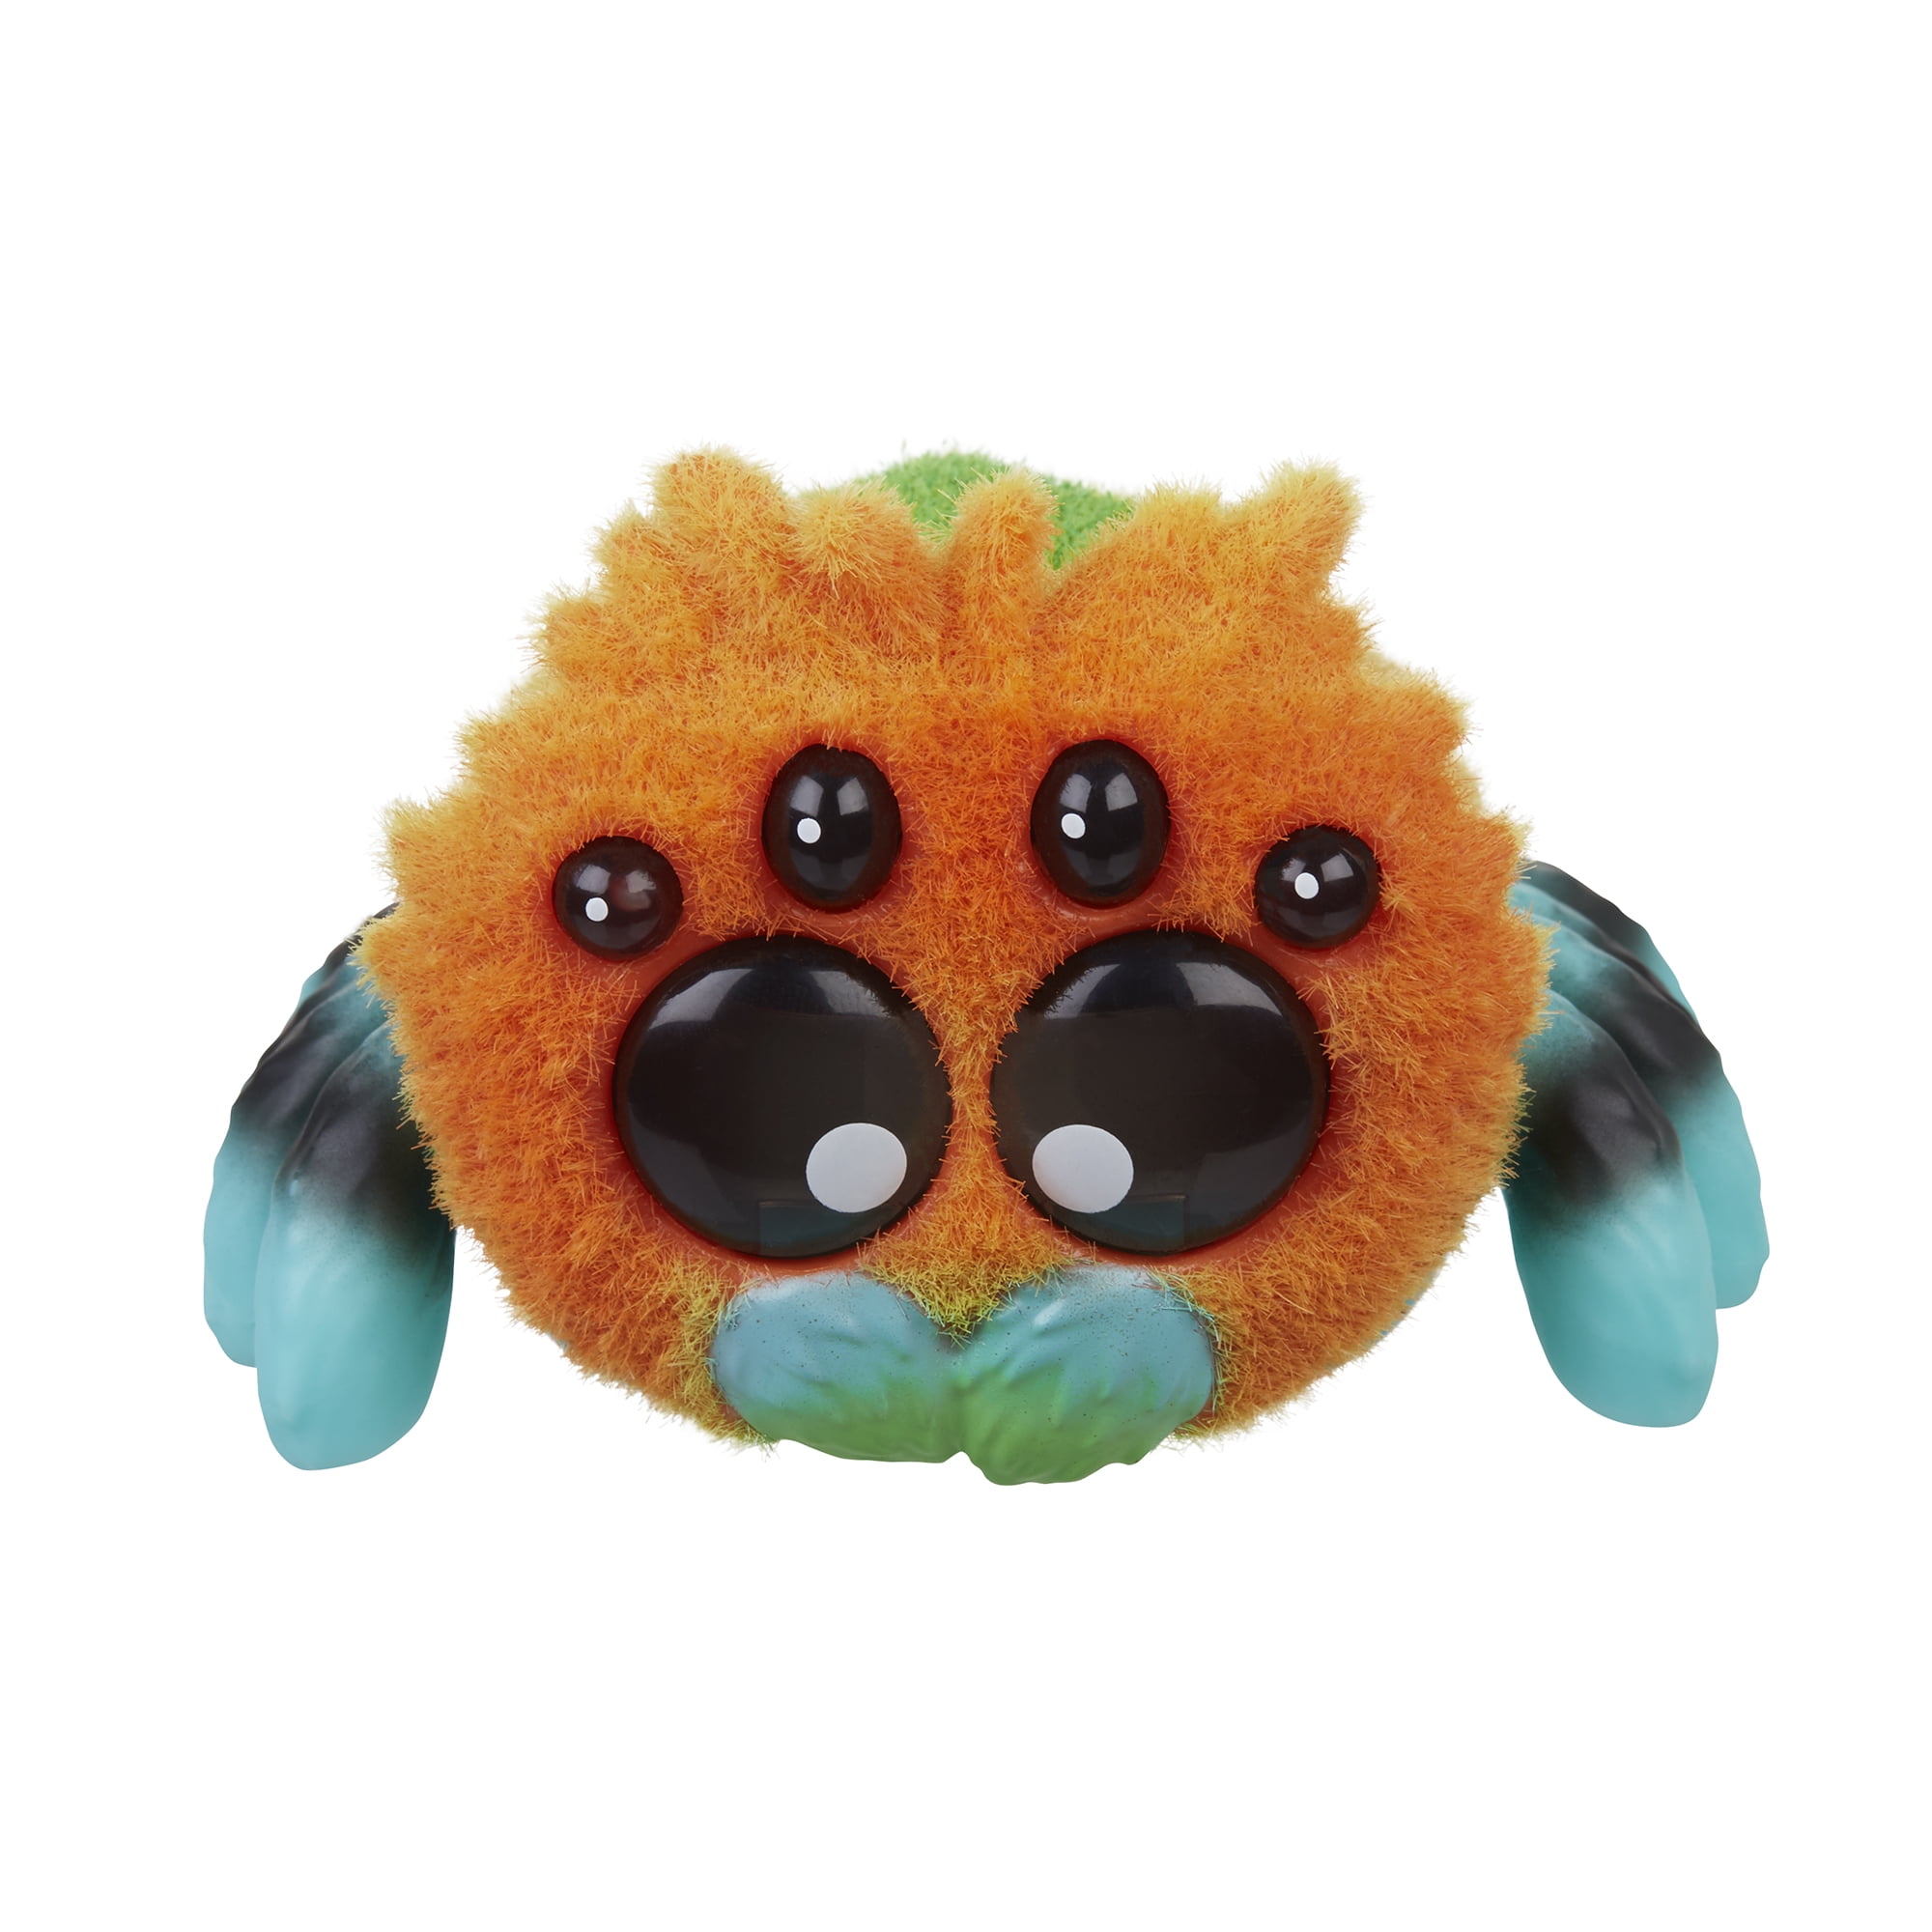 "Fuzzbo" Voice Activated Motion Spider Pet Toy Light Up Eyes Ages 5+ Yellies 